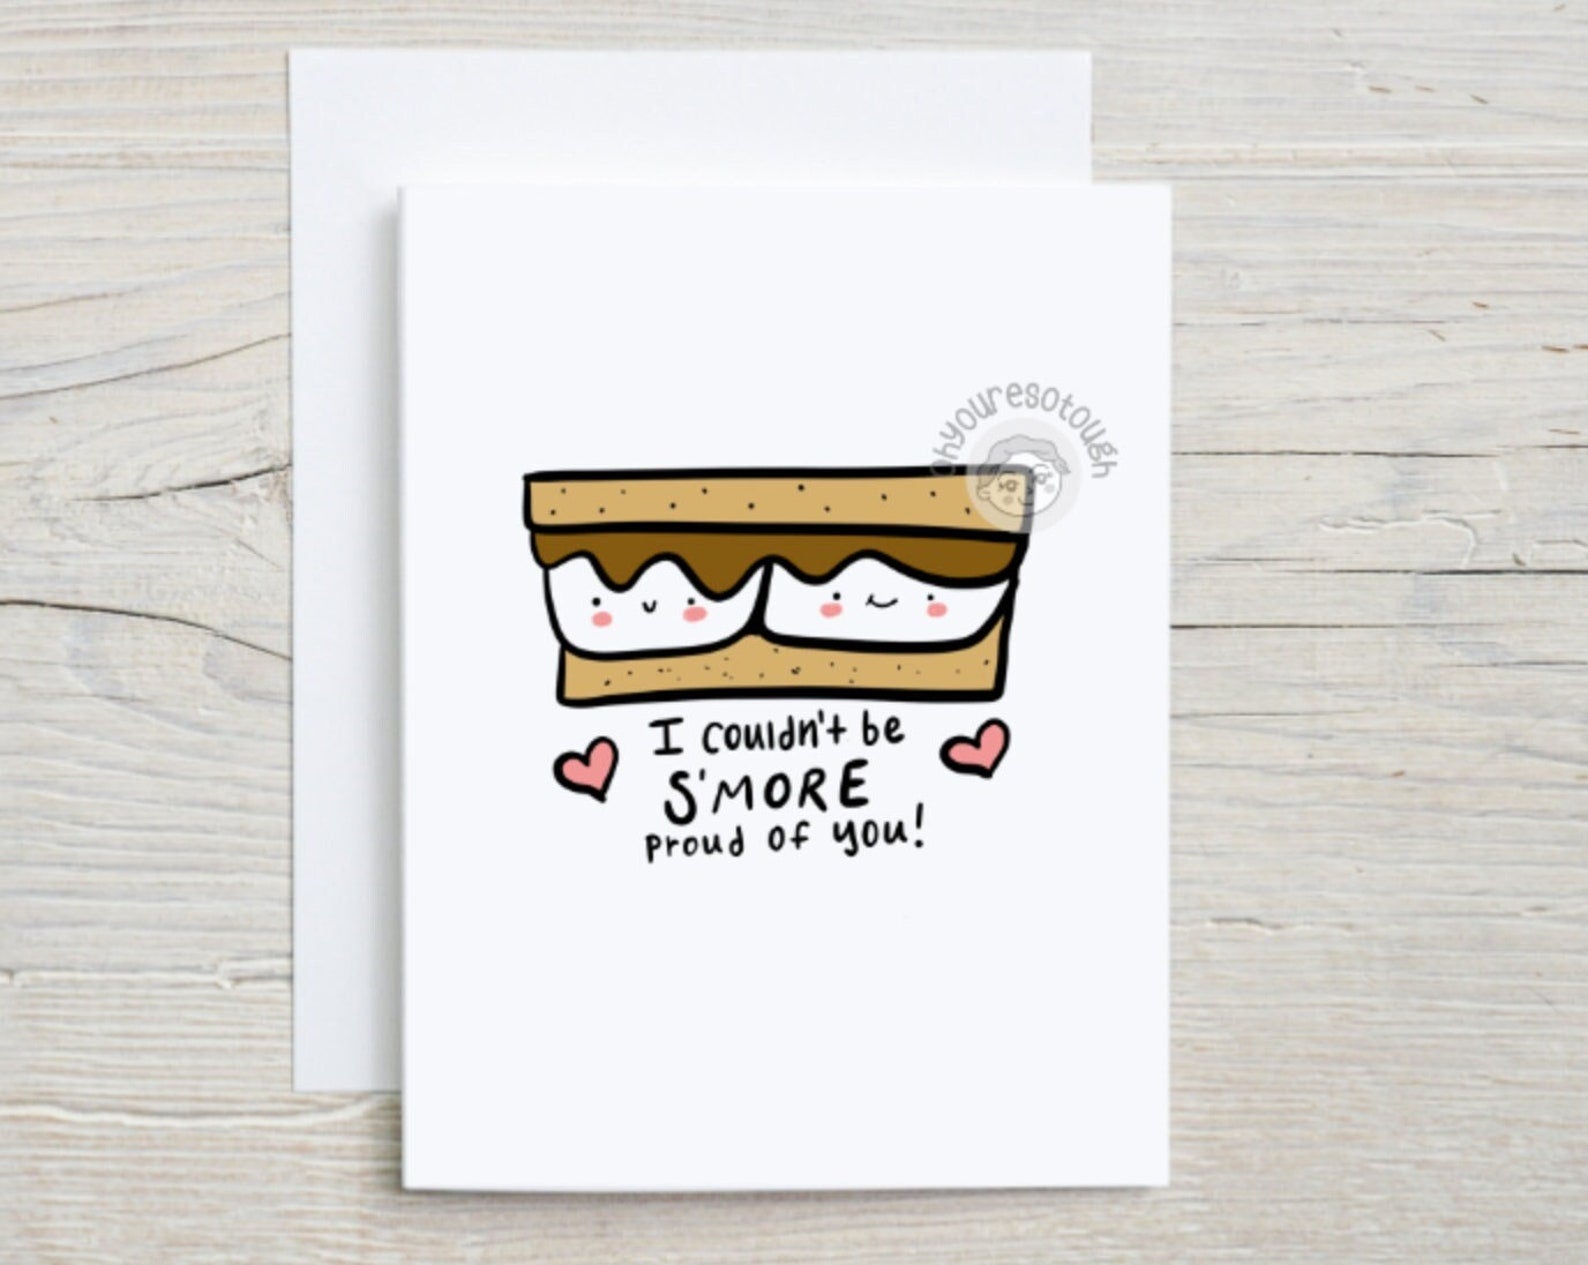 Cute Encouragement Card - I Couldn't Be S'more Proud - Congratulations Card - Friendship Card - I am Proud of You Card - Cancer Card